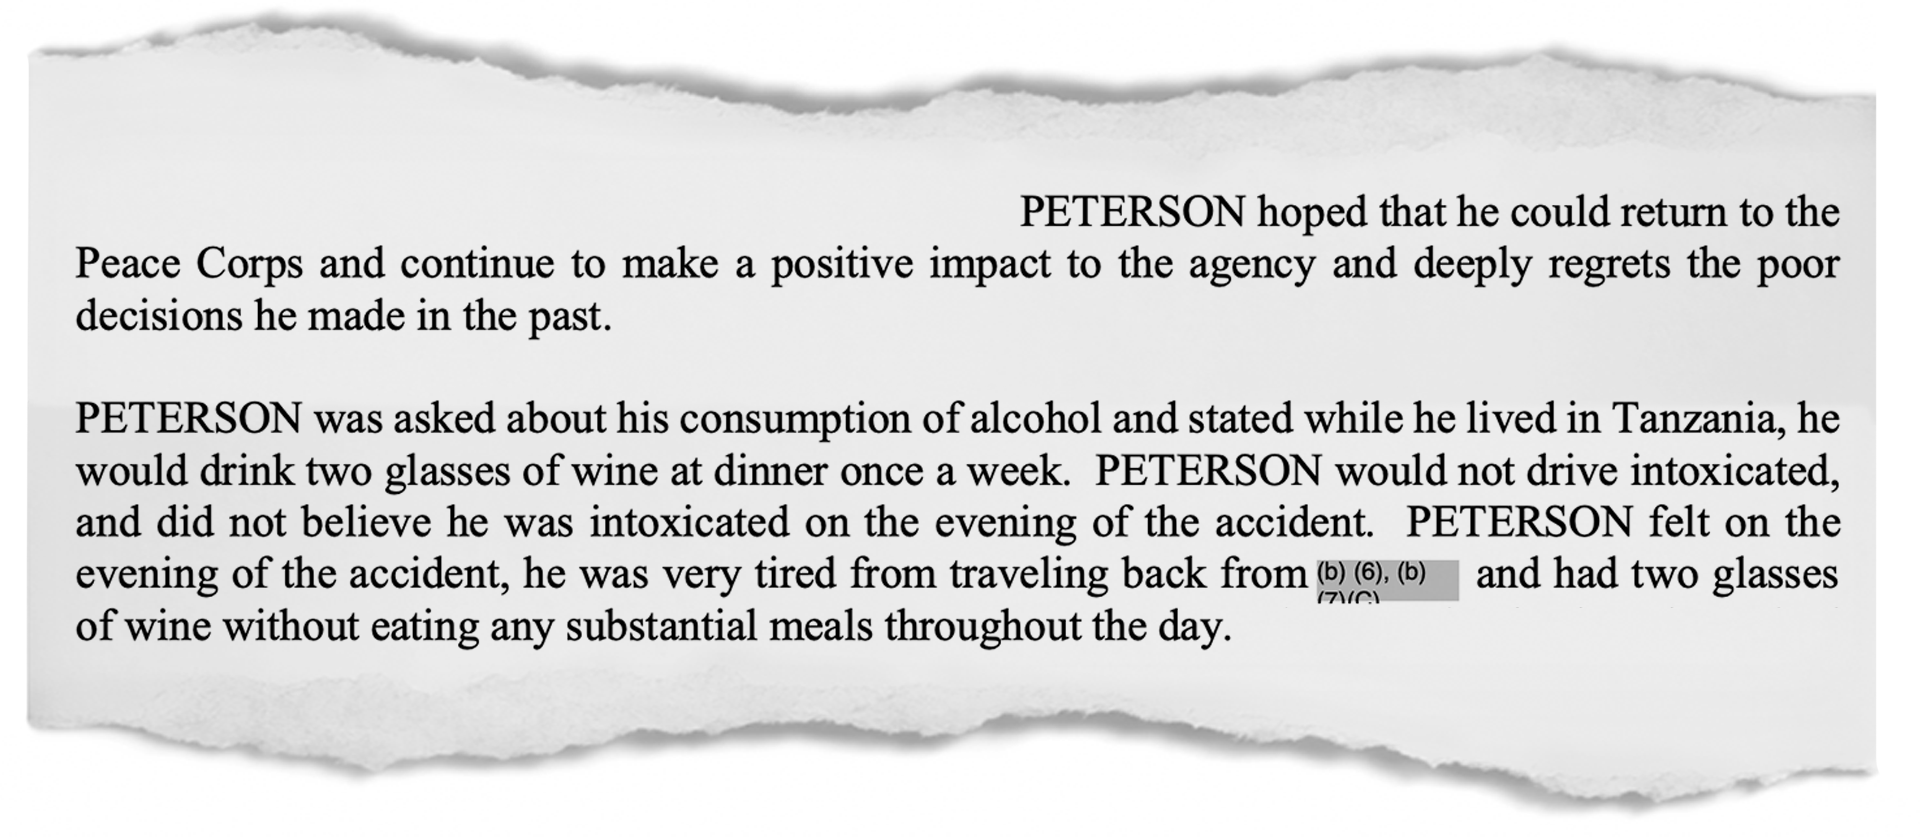 About five months after returning from Tanzania, John Peterson was interviewed by the Peace Corps and sought to clarify his level of intoxication the morning of the incident.